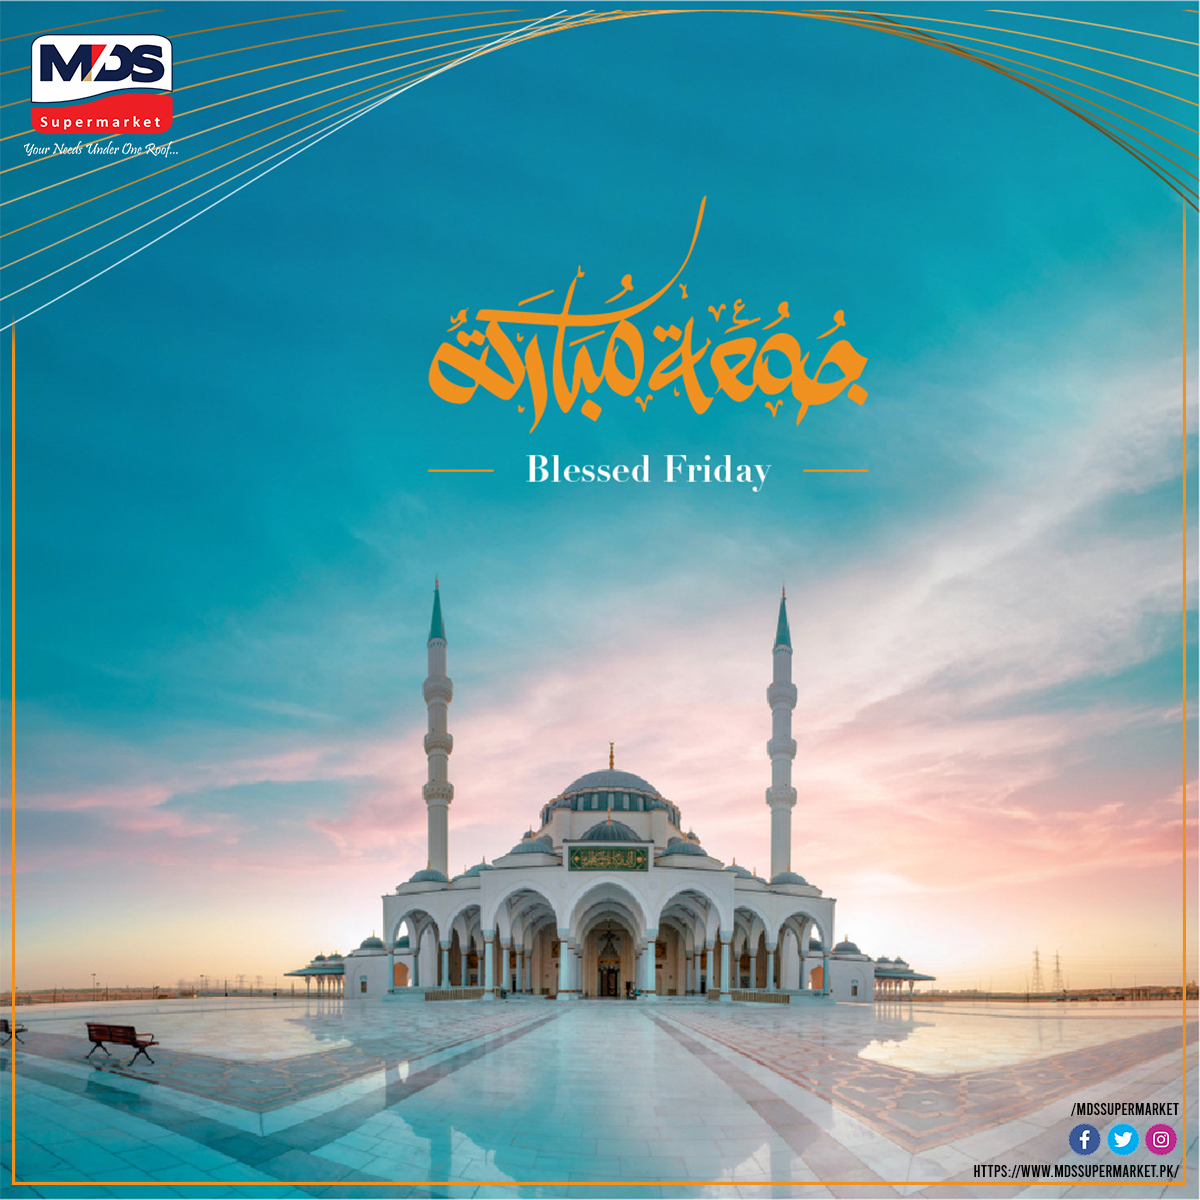 🌙✨ JUMMA MUBARAK! ✨🌙
May your Friday be blessed with peace, happiness, and countless blessings. Join us at MDS Supermarket as we wish you a day filled with serenity and joy. 🤲❤️

#JummaMubarak #MDSupermarket #BlessingsOnBlessings #FridayVibes #PeaceAndLove #CommunitySpirit